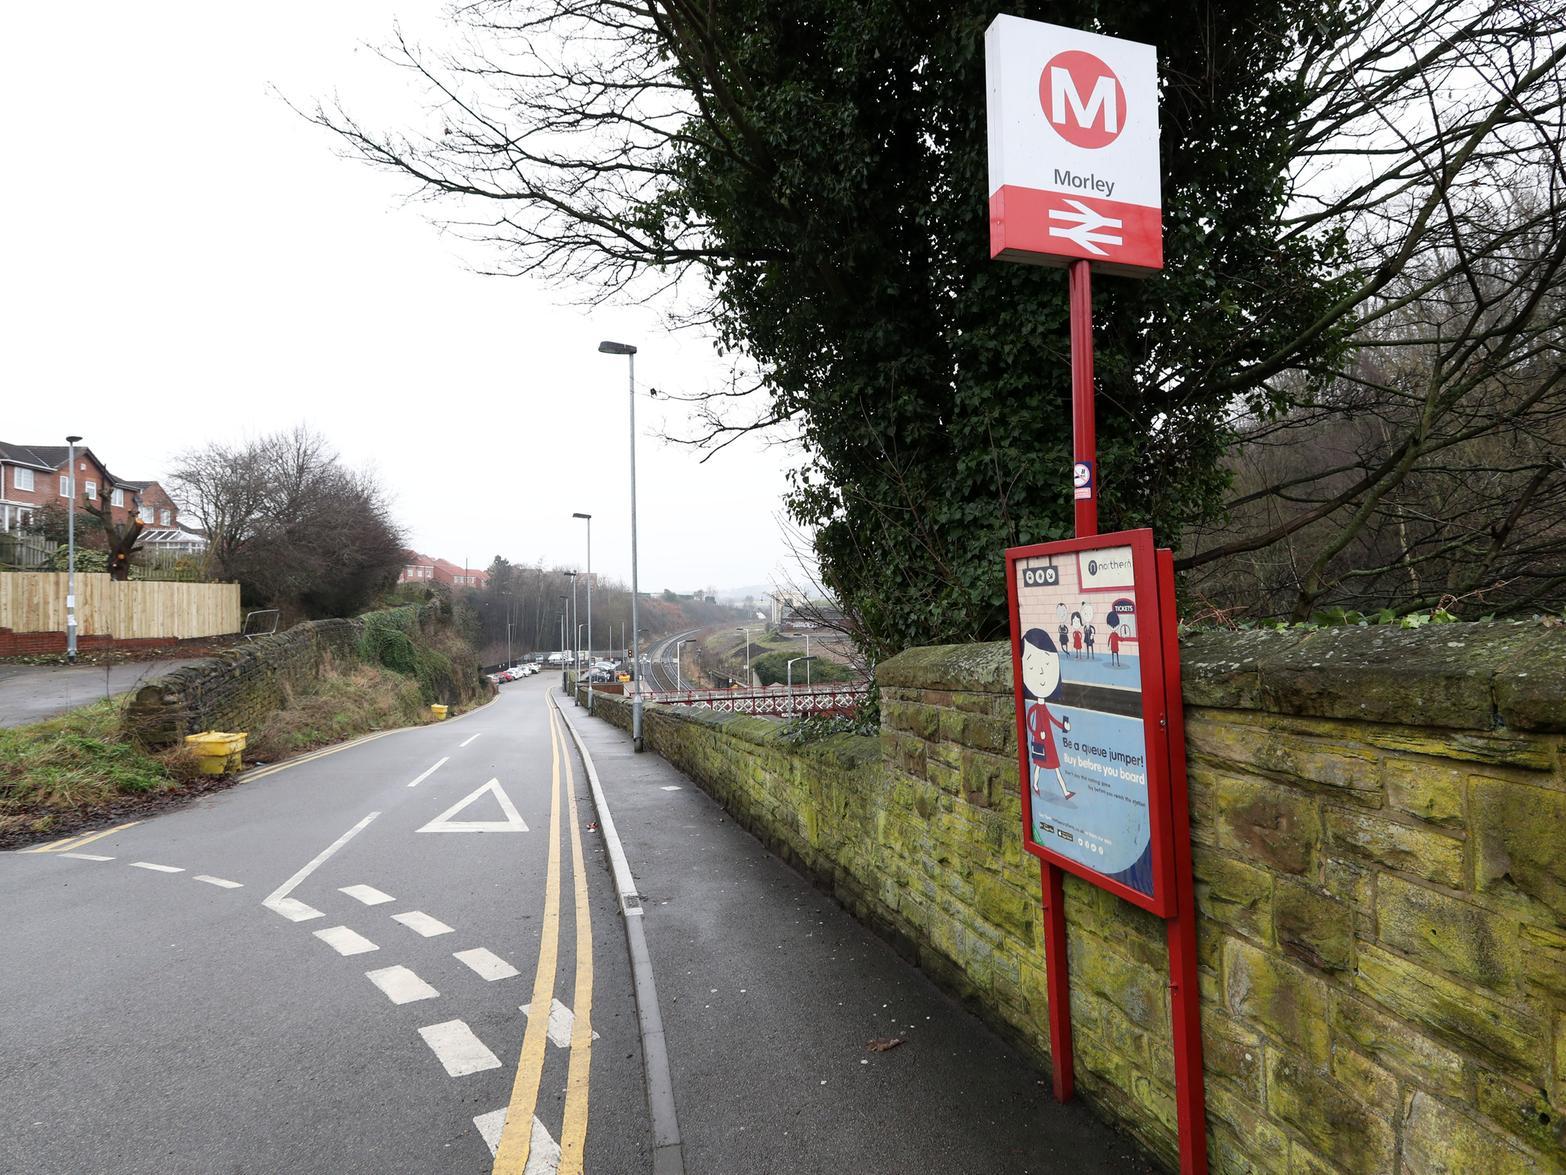 There were 118 reports of violence and sexual offences in Morley and the surrounding area